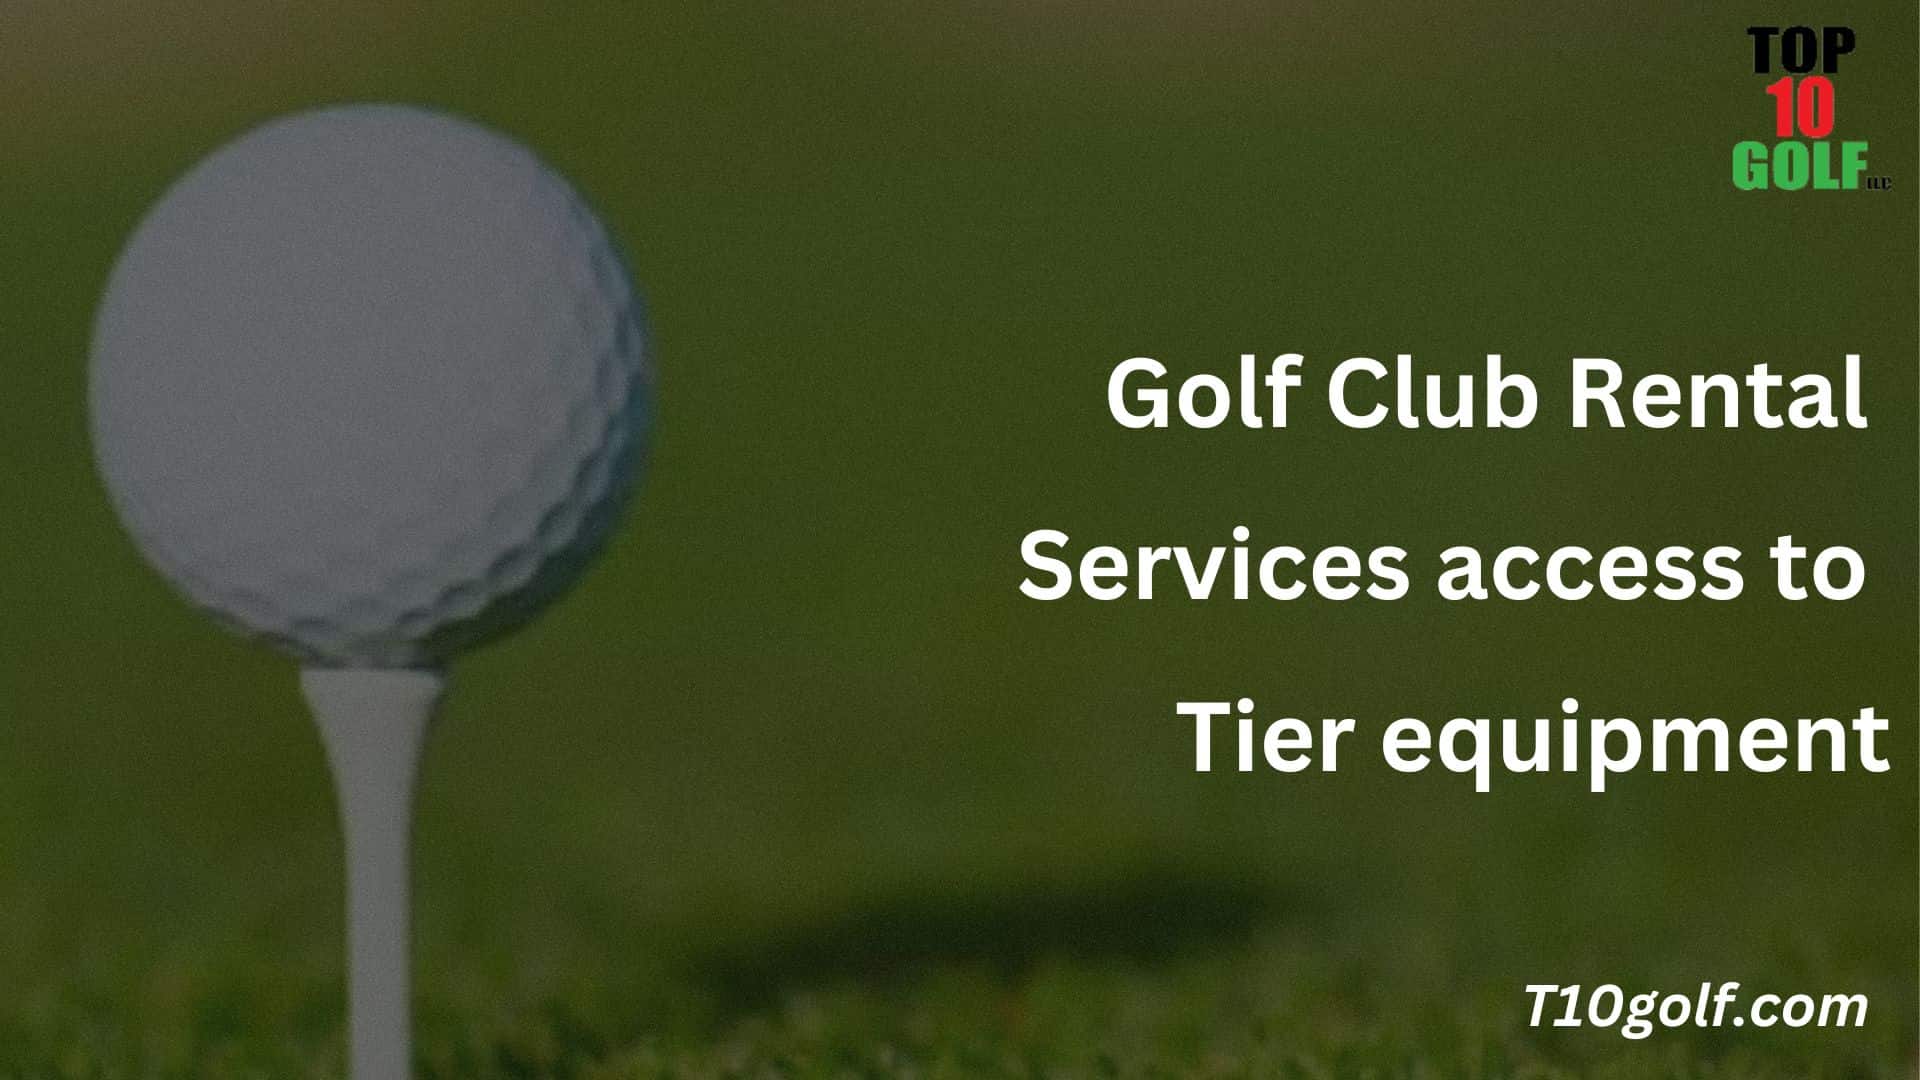 Golf Club Rental Services access to tier equipment